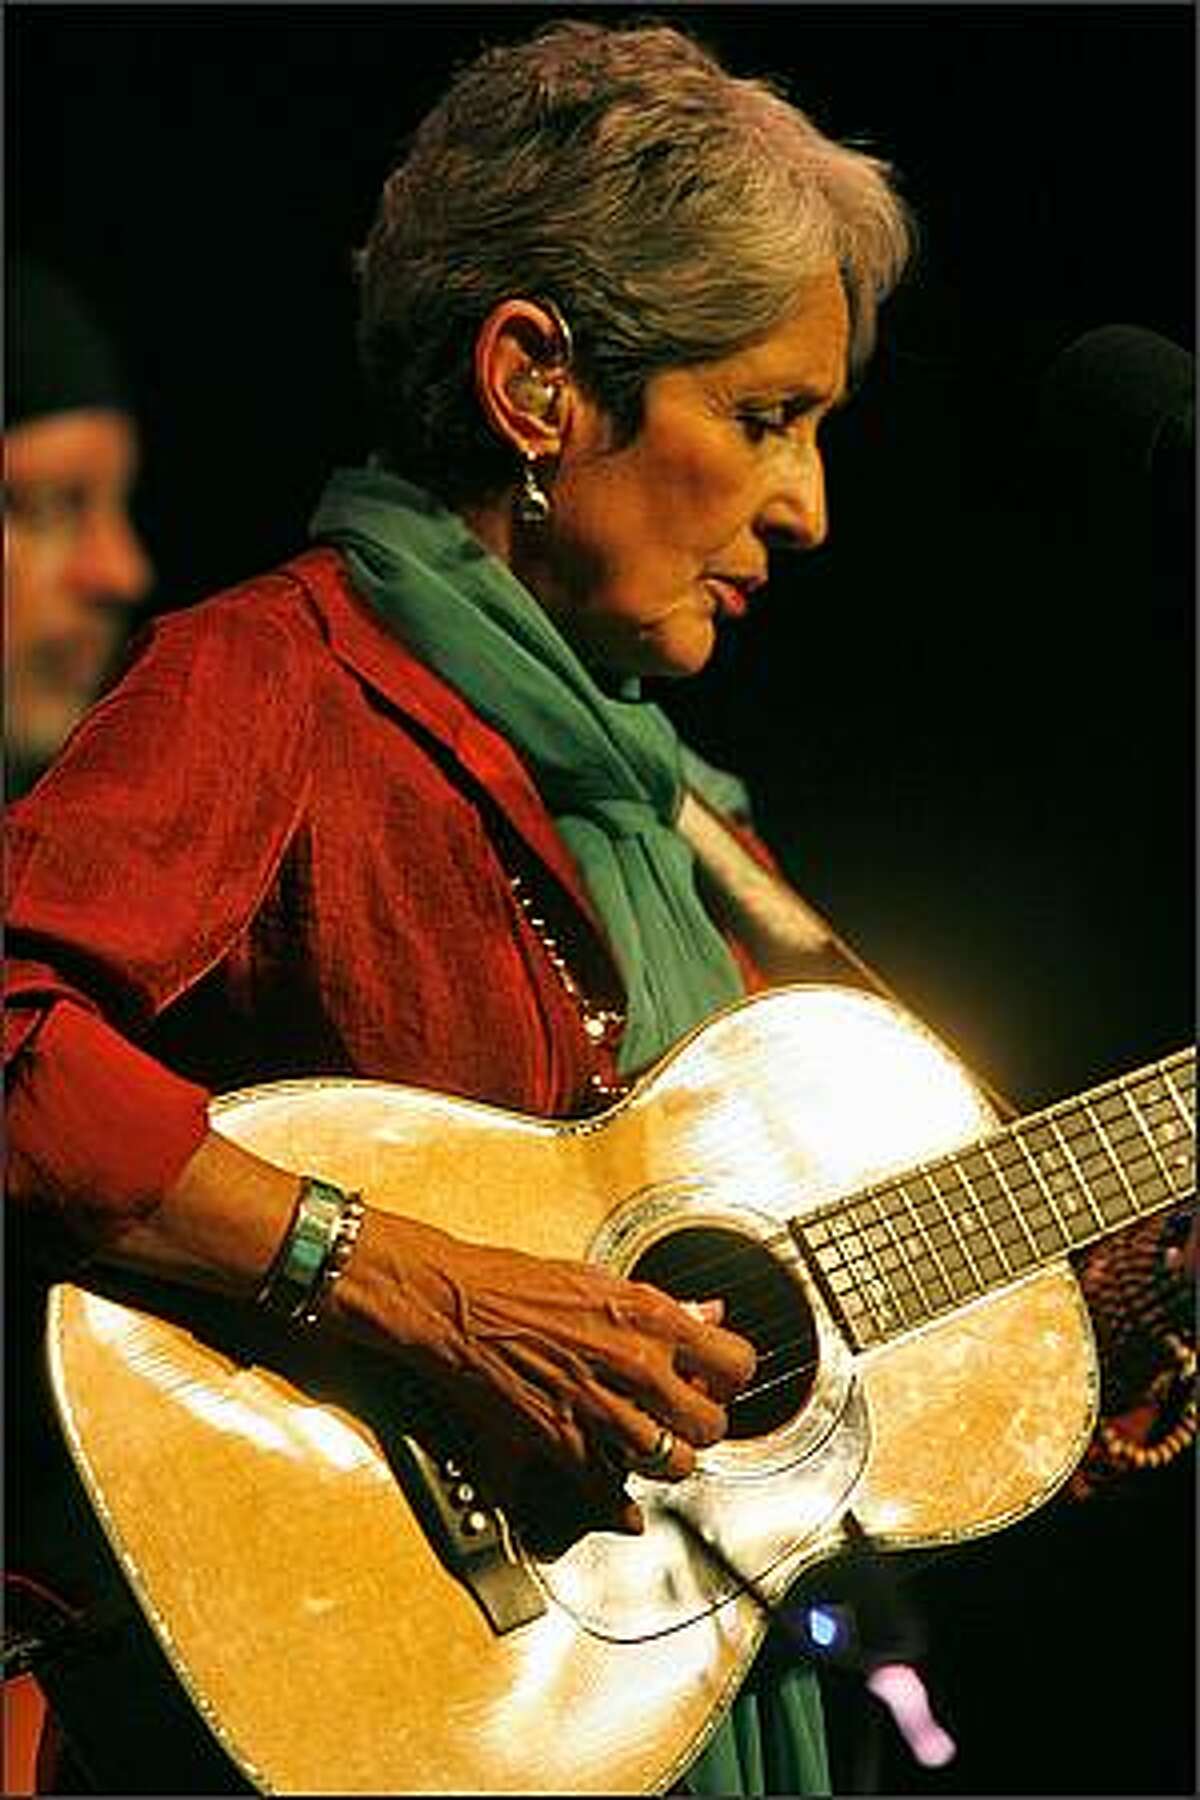 Joan Baez plays The Moore Theater in Seattle to promote her twenty-fourth studio album "Day After Tomorrow" produced by Steve Earle. This year, 2008, marks Baez's 50th year as a performer.